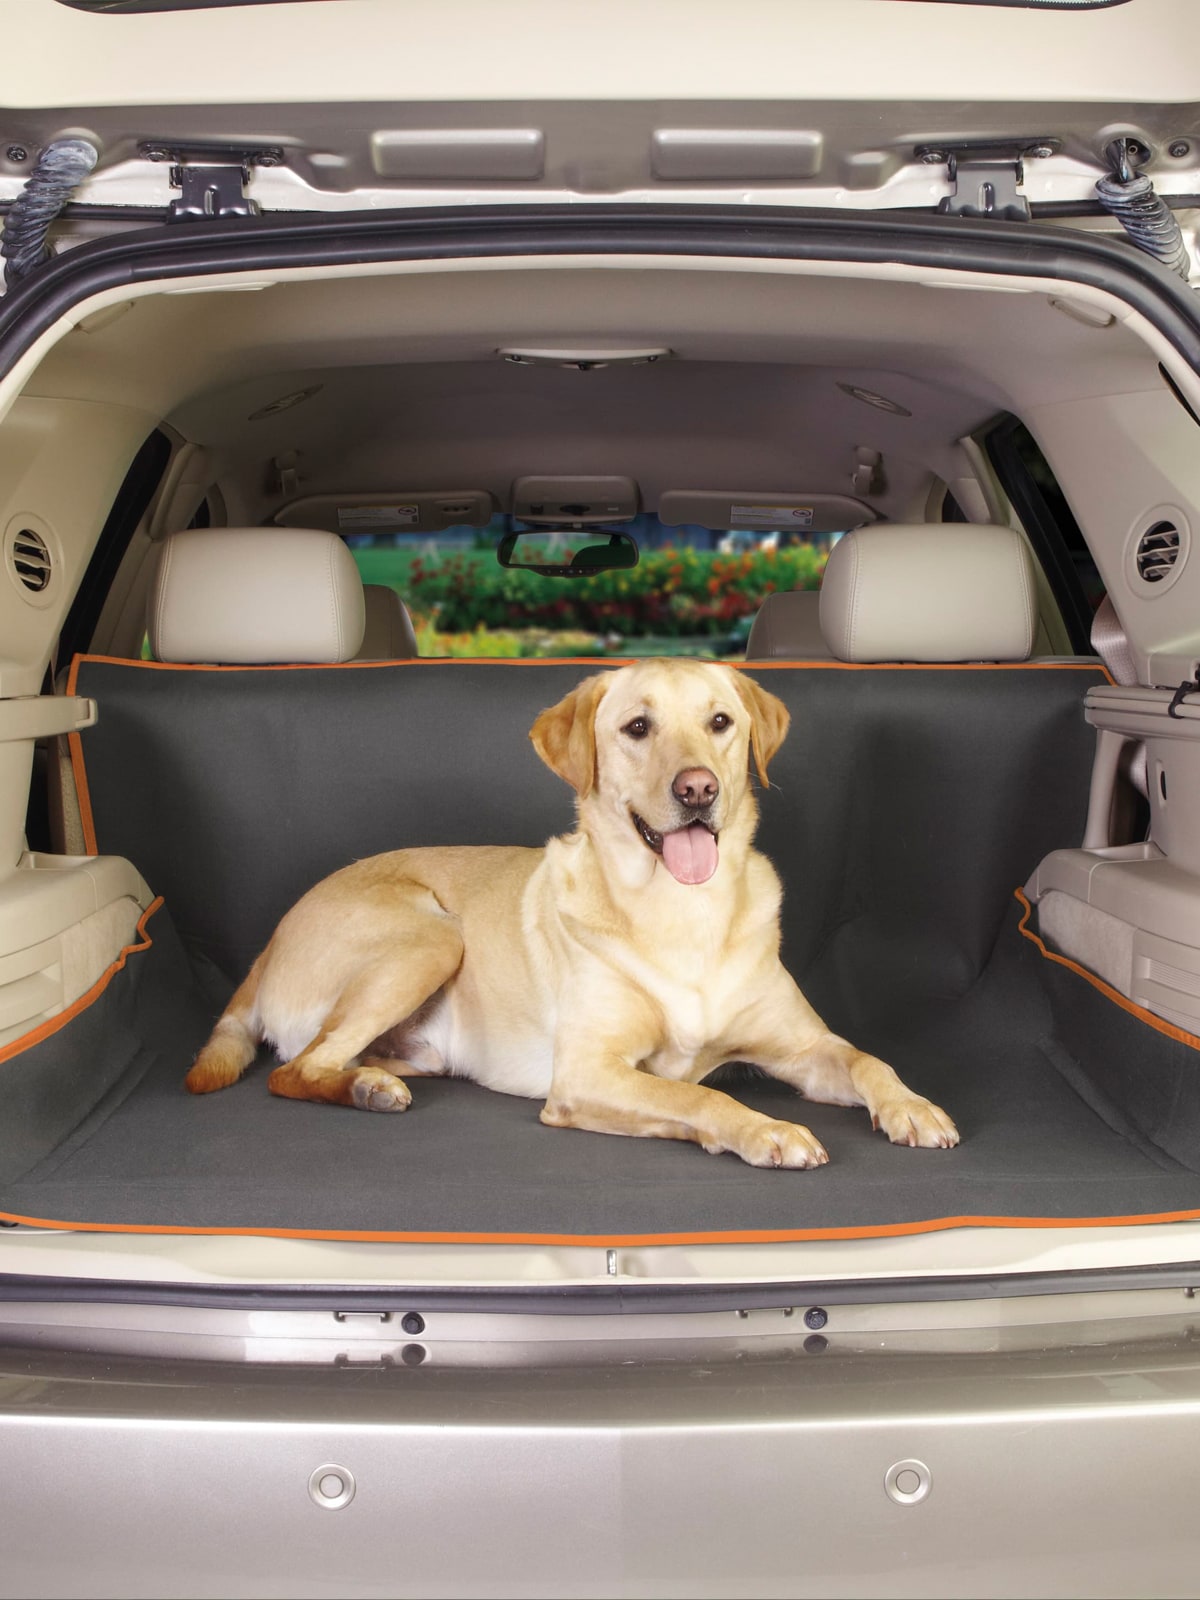 Insect Shield Cargo Area Cover for Dogs